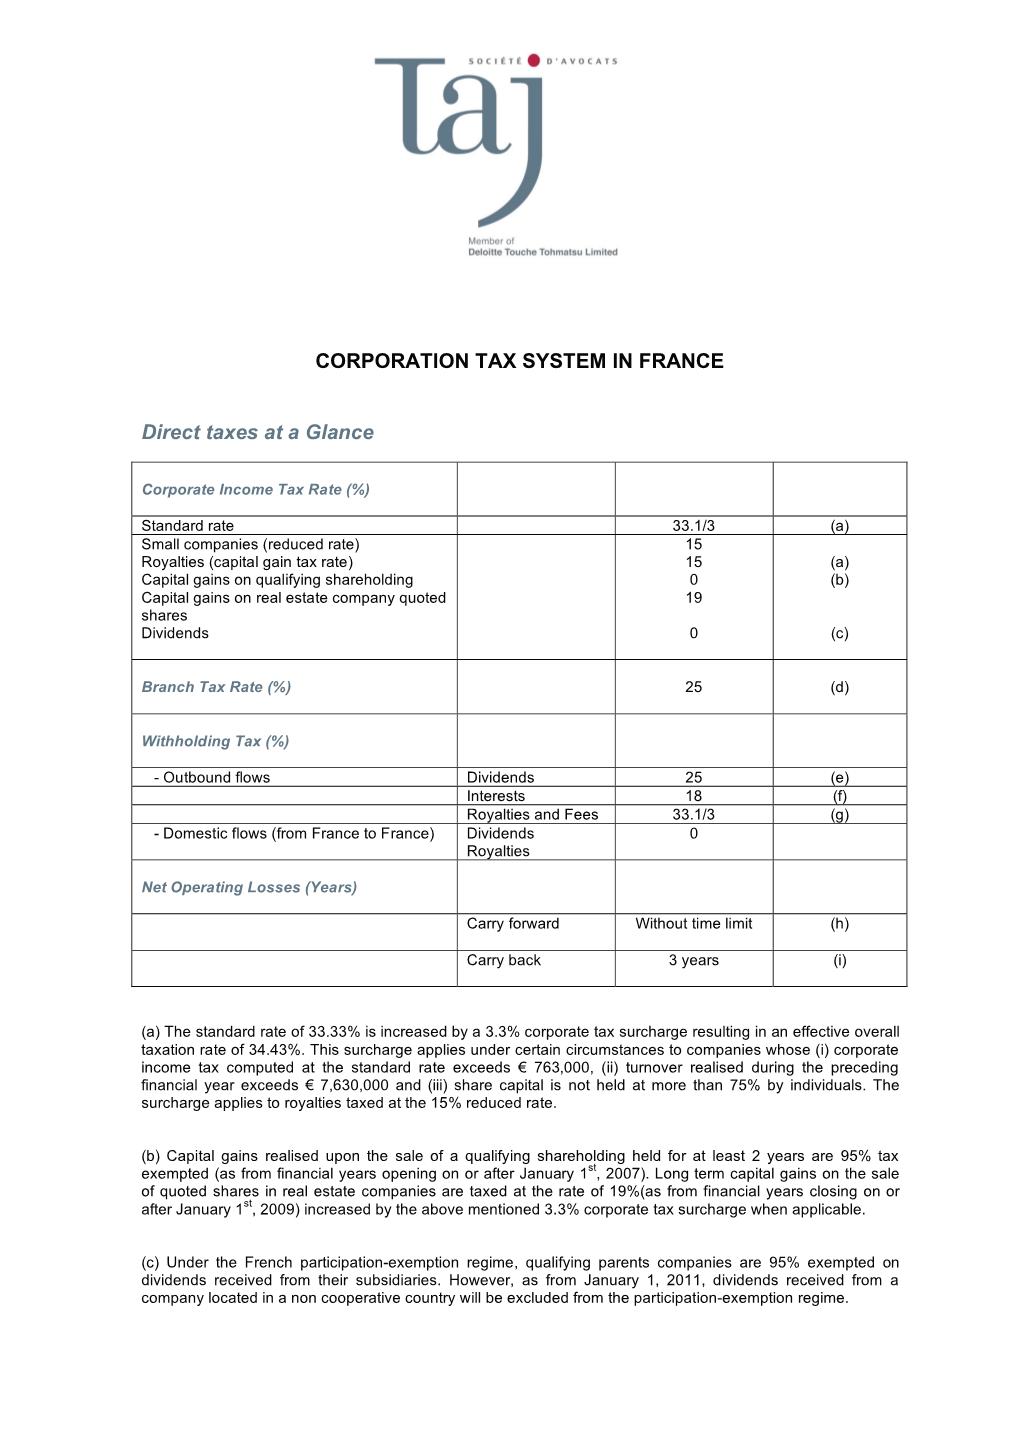 CORPORATION TAX SYSTEM in FRANCE Direct Taxes at a Glance